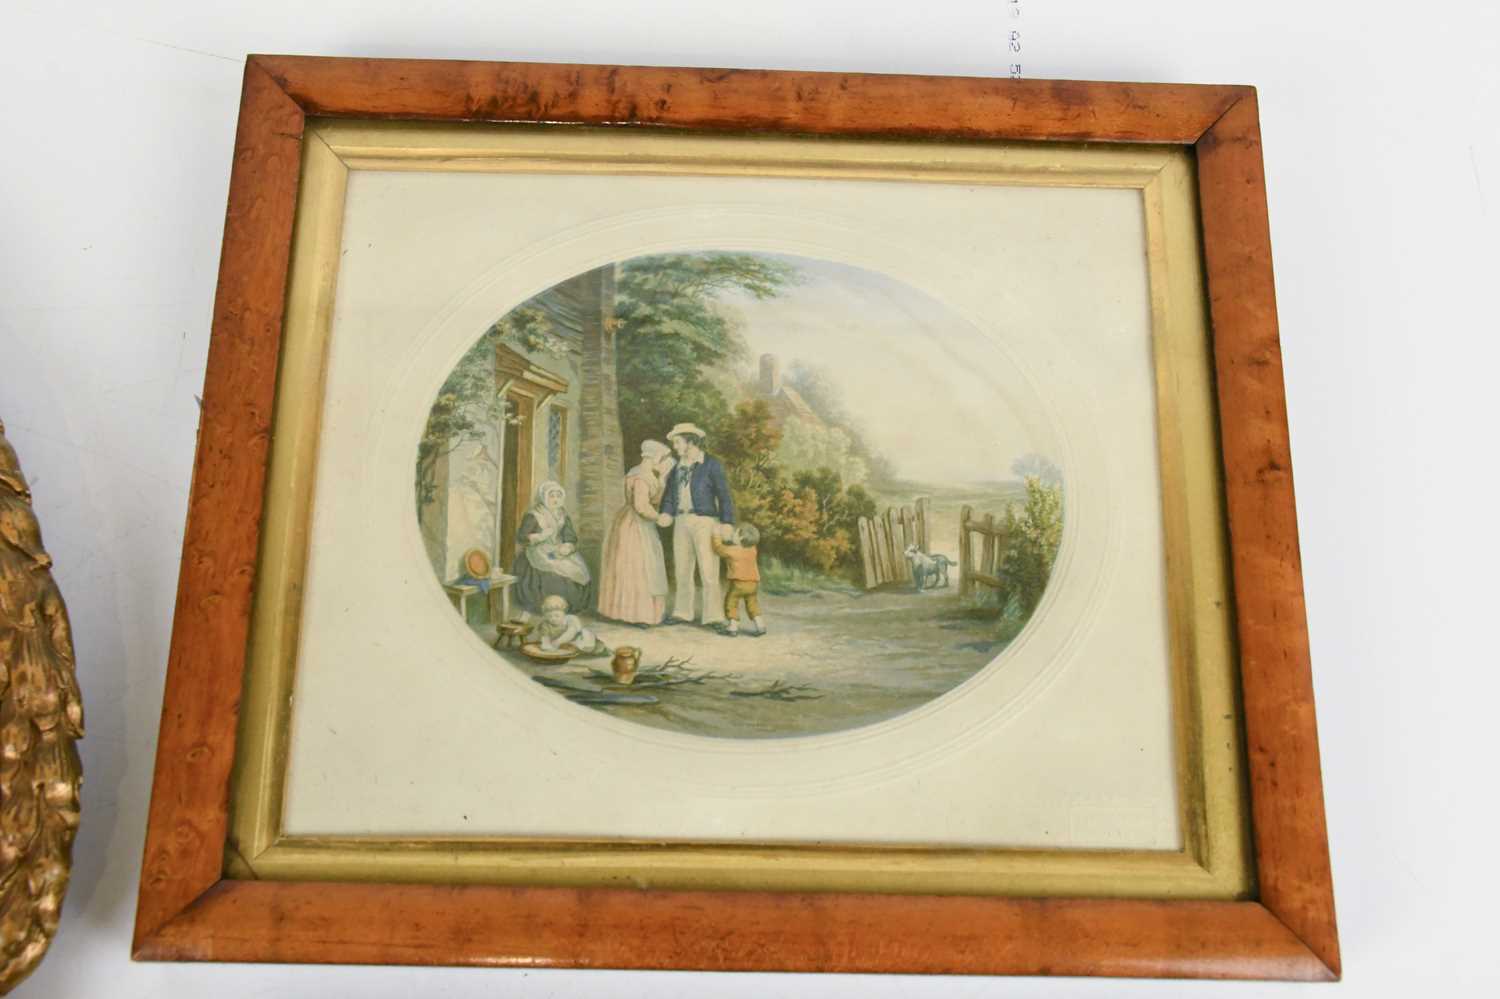 Two 19th century prints, 'The Sailor's Departure', and 'Blowing Bubbles', 18 x 22cm, in maple - Image 5 of 6